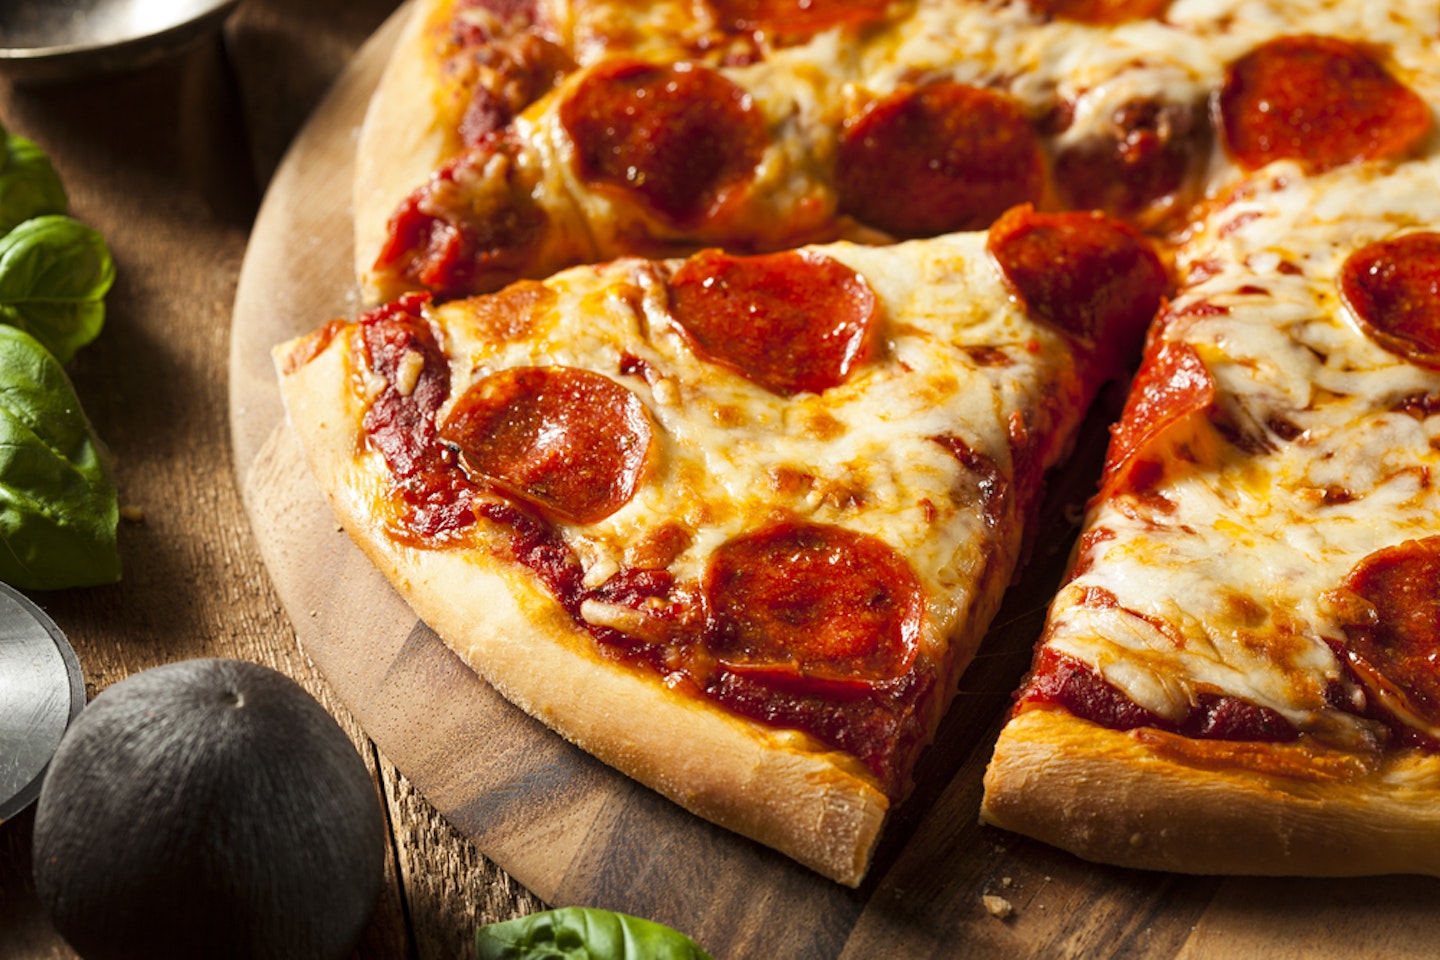 Studies claim PIZZA is actually a healthier breakfast food than most cereals!